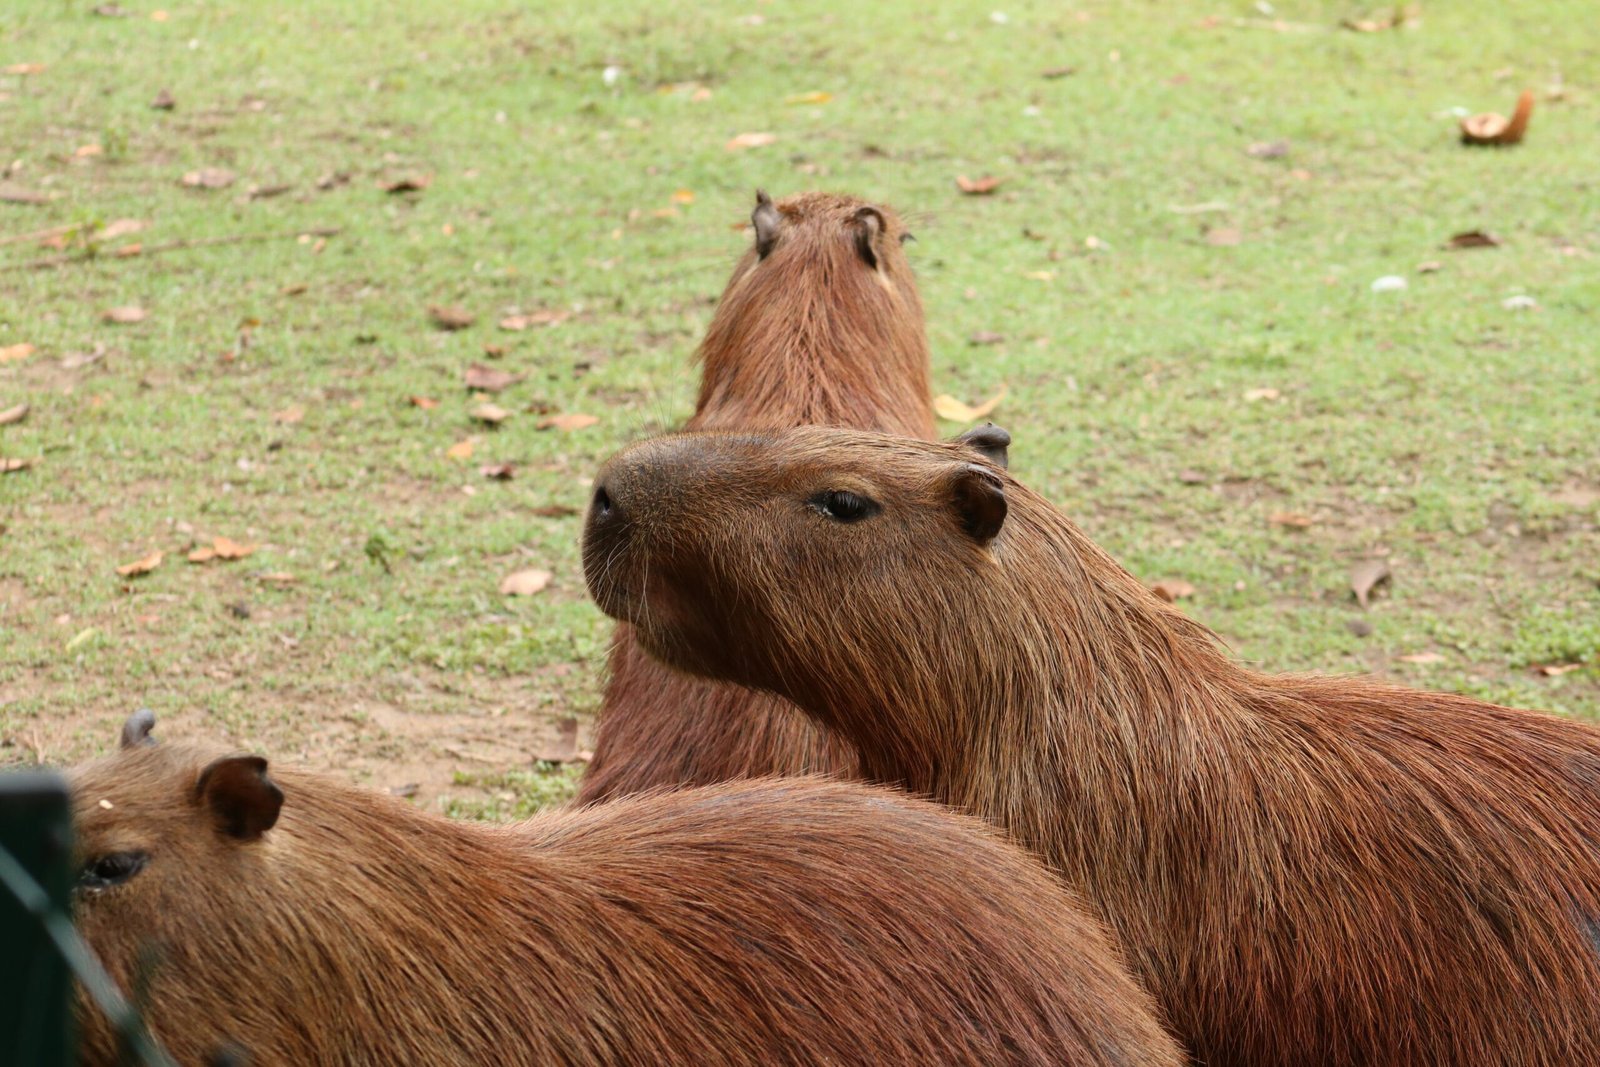 What Activities Do Capybaras Engage In